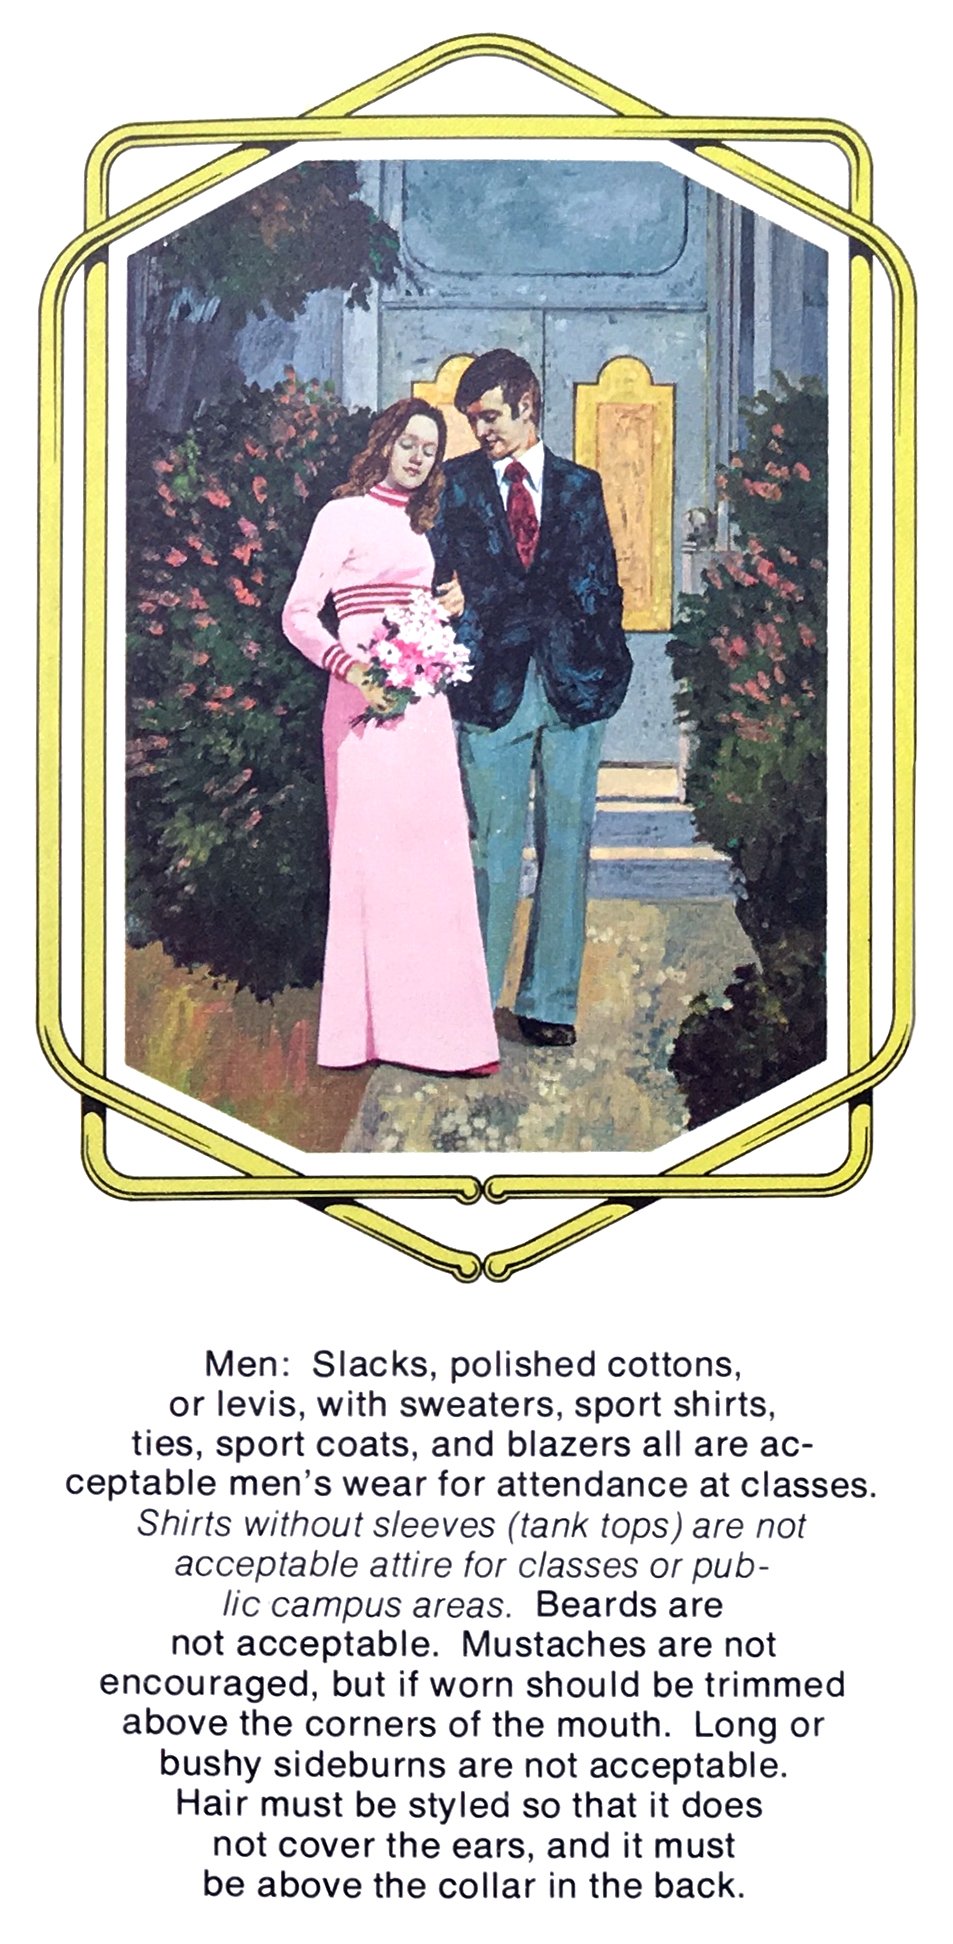 A page of a phlet showing a young man and woman in a decorative gold border, from the 1972 Brigham Young University (BYU) dress-and-grooming pamphlet, A Style of Our Own, detailing clothing standards and the BYU beard ban.